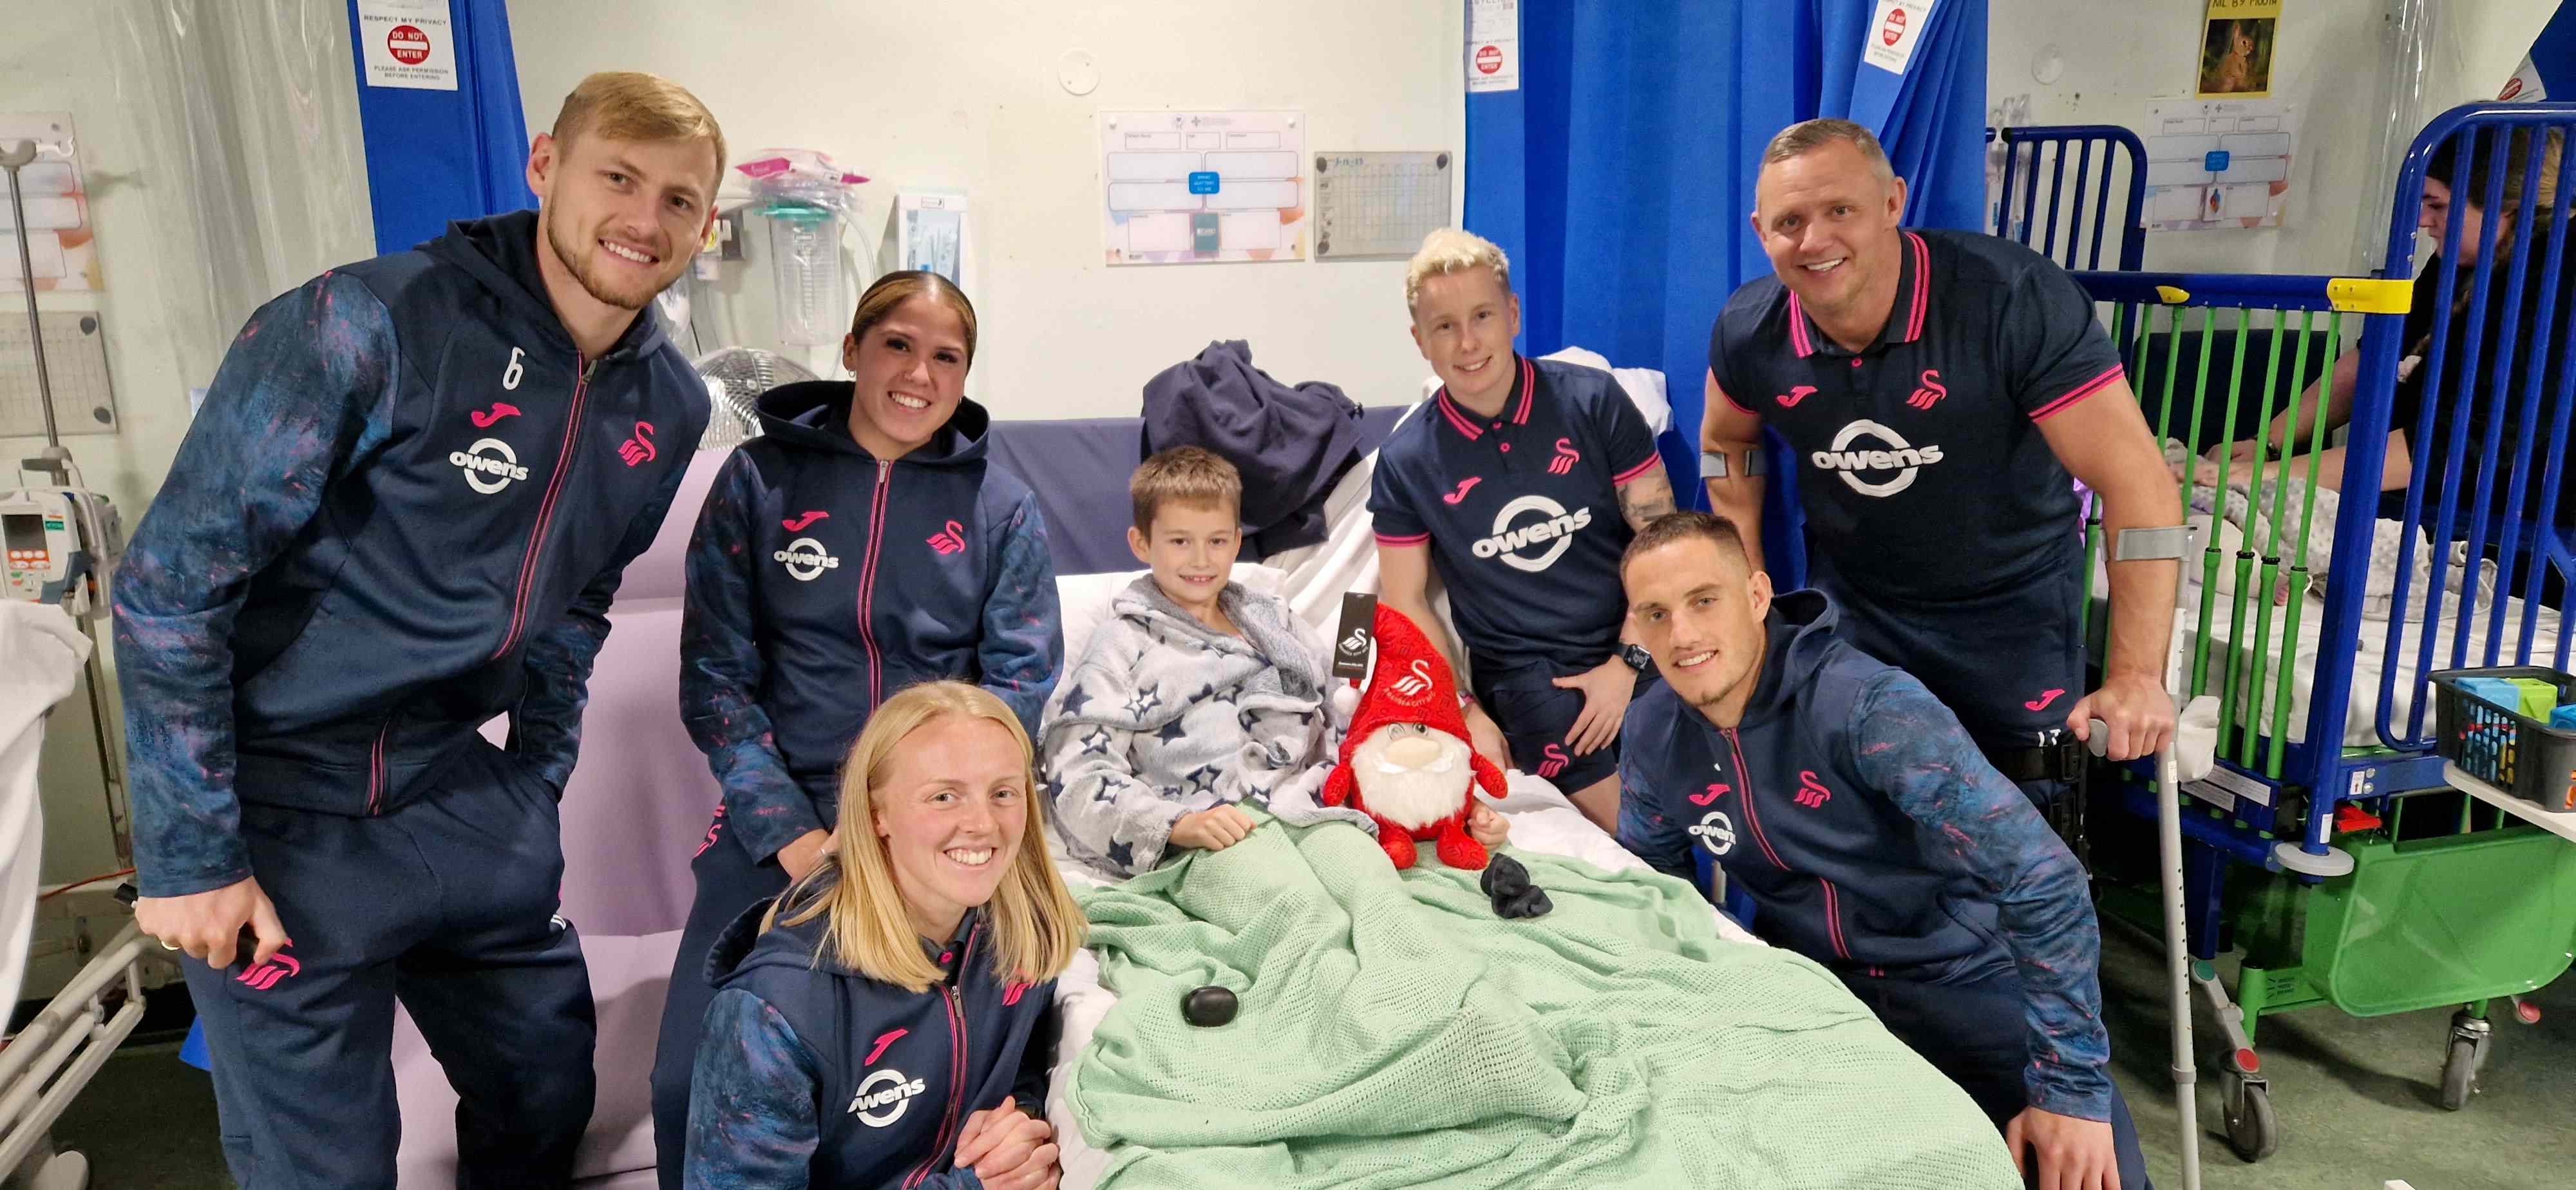 Riley Jenkins, 10, was visited by Swansea City players (back row, from left) Harry Darling, Jess Williams, Stacey John-Davis and club ambassador Lee Trundle along with Sophie Brisland-Hancocks and Jerry Yates. (Image: Swansea Bay NHS)